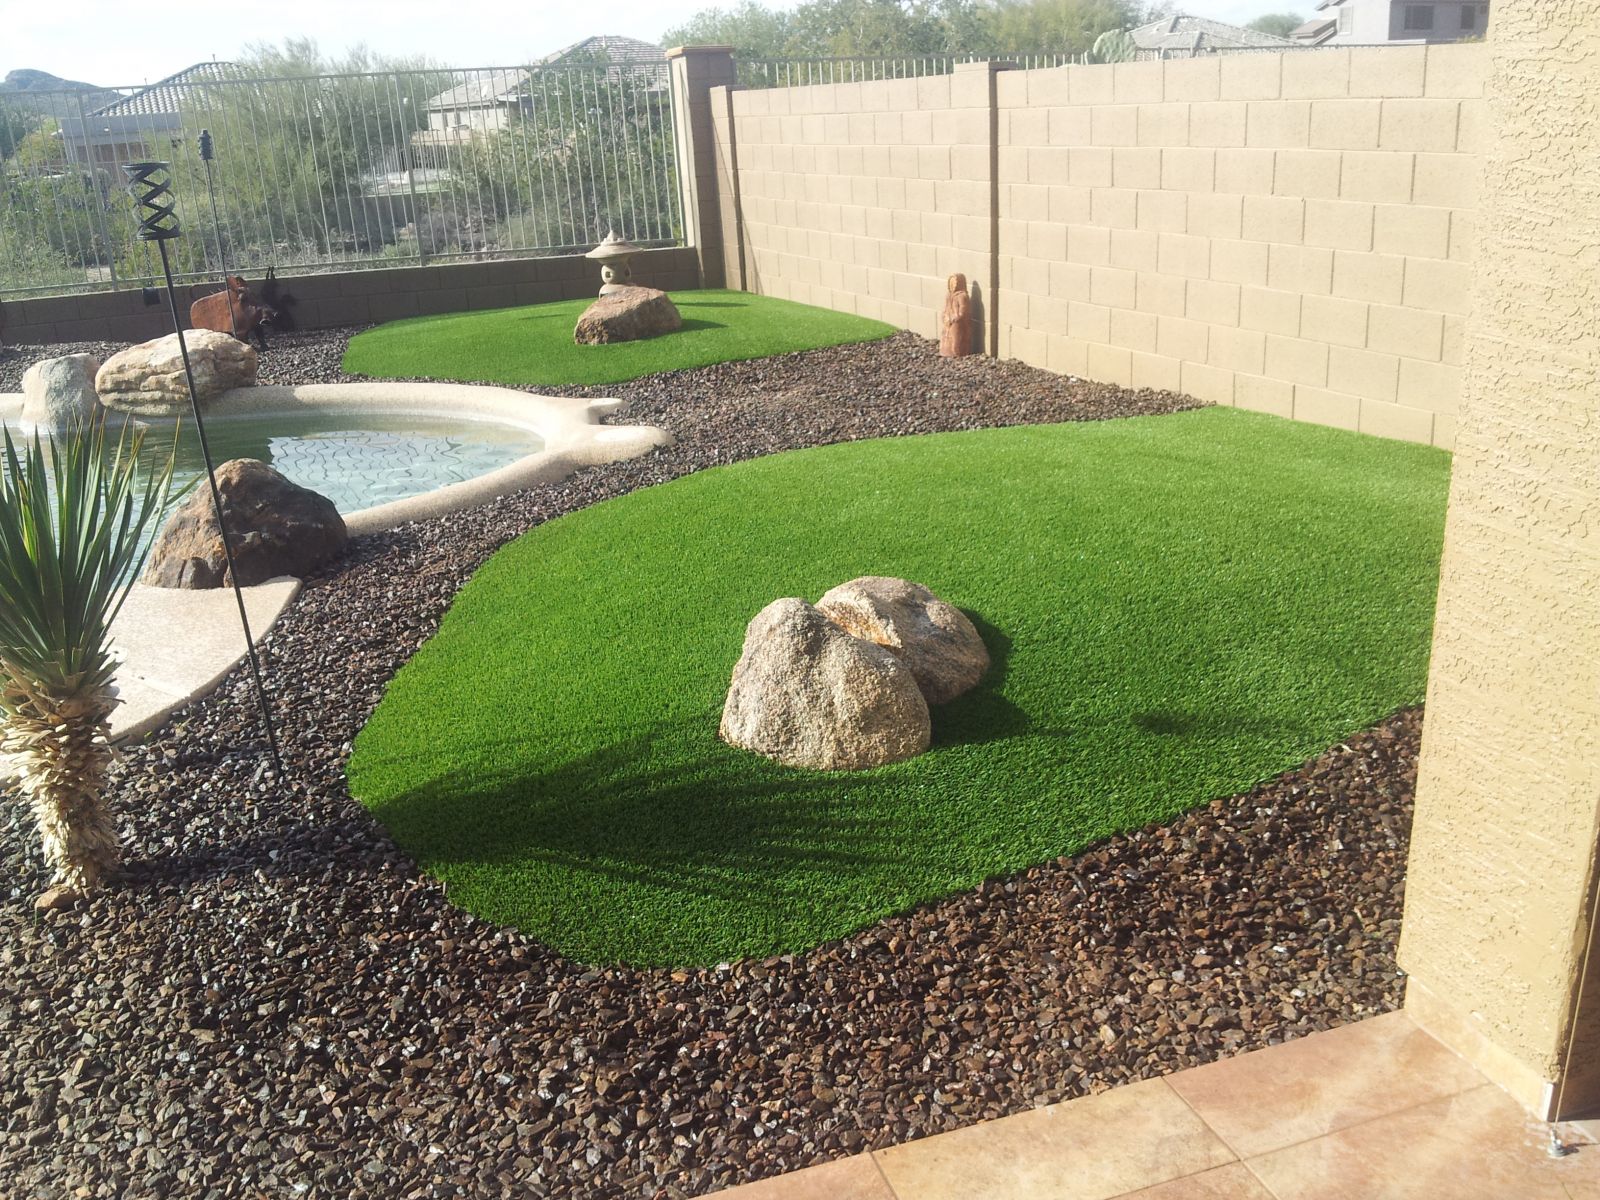 Scottsdale Artificial Turf. Fake Grass Helps Improve Golf